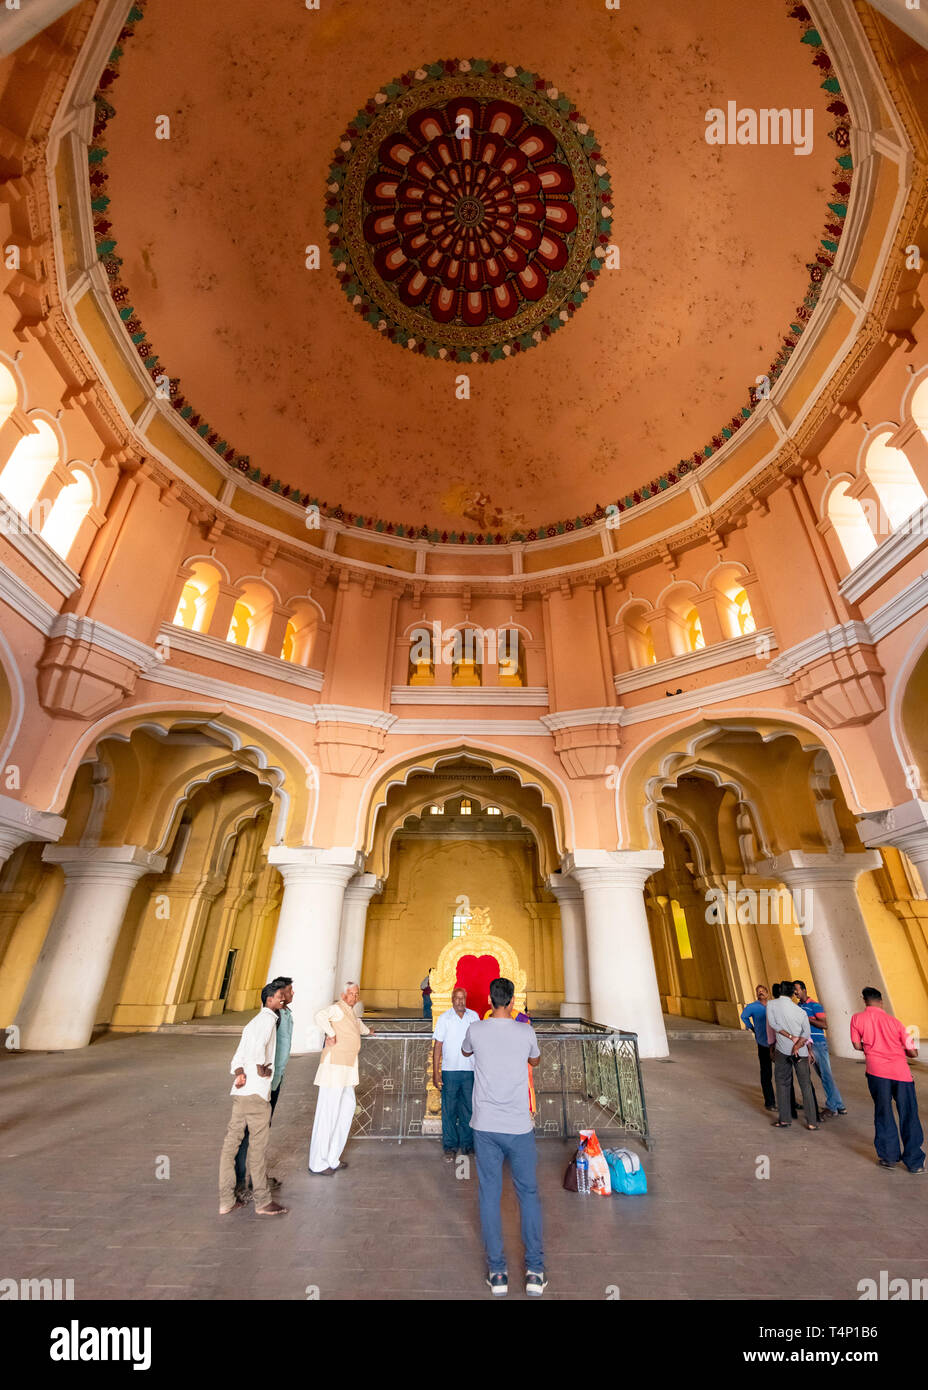 Vertical view of the amazing domed ceiling at the Thirumalai Nayak Palace in Madurai, India. Stock Photo